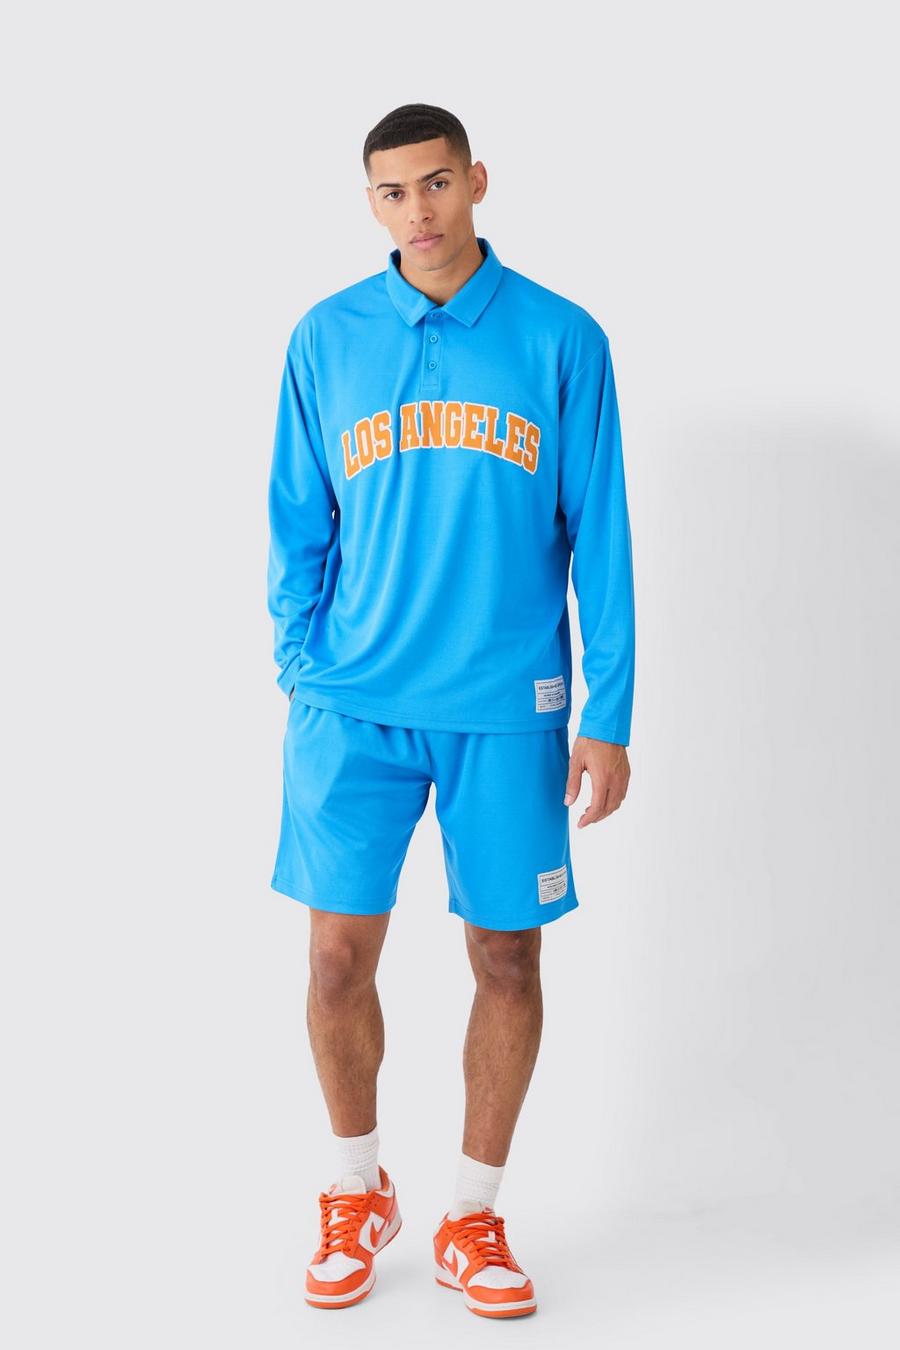 Blue Oversized Mesh Los Angeles Rugby Polo En Mesh Shorts Set